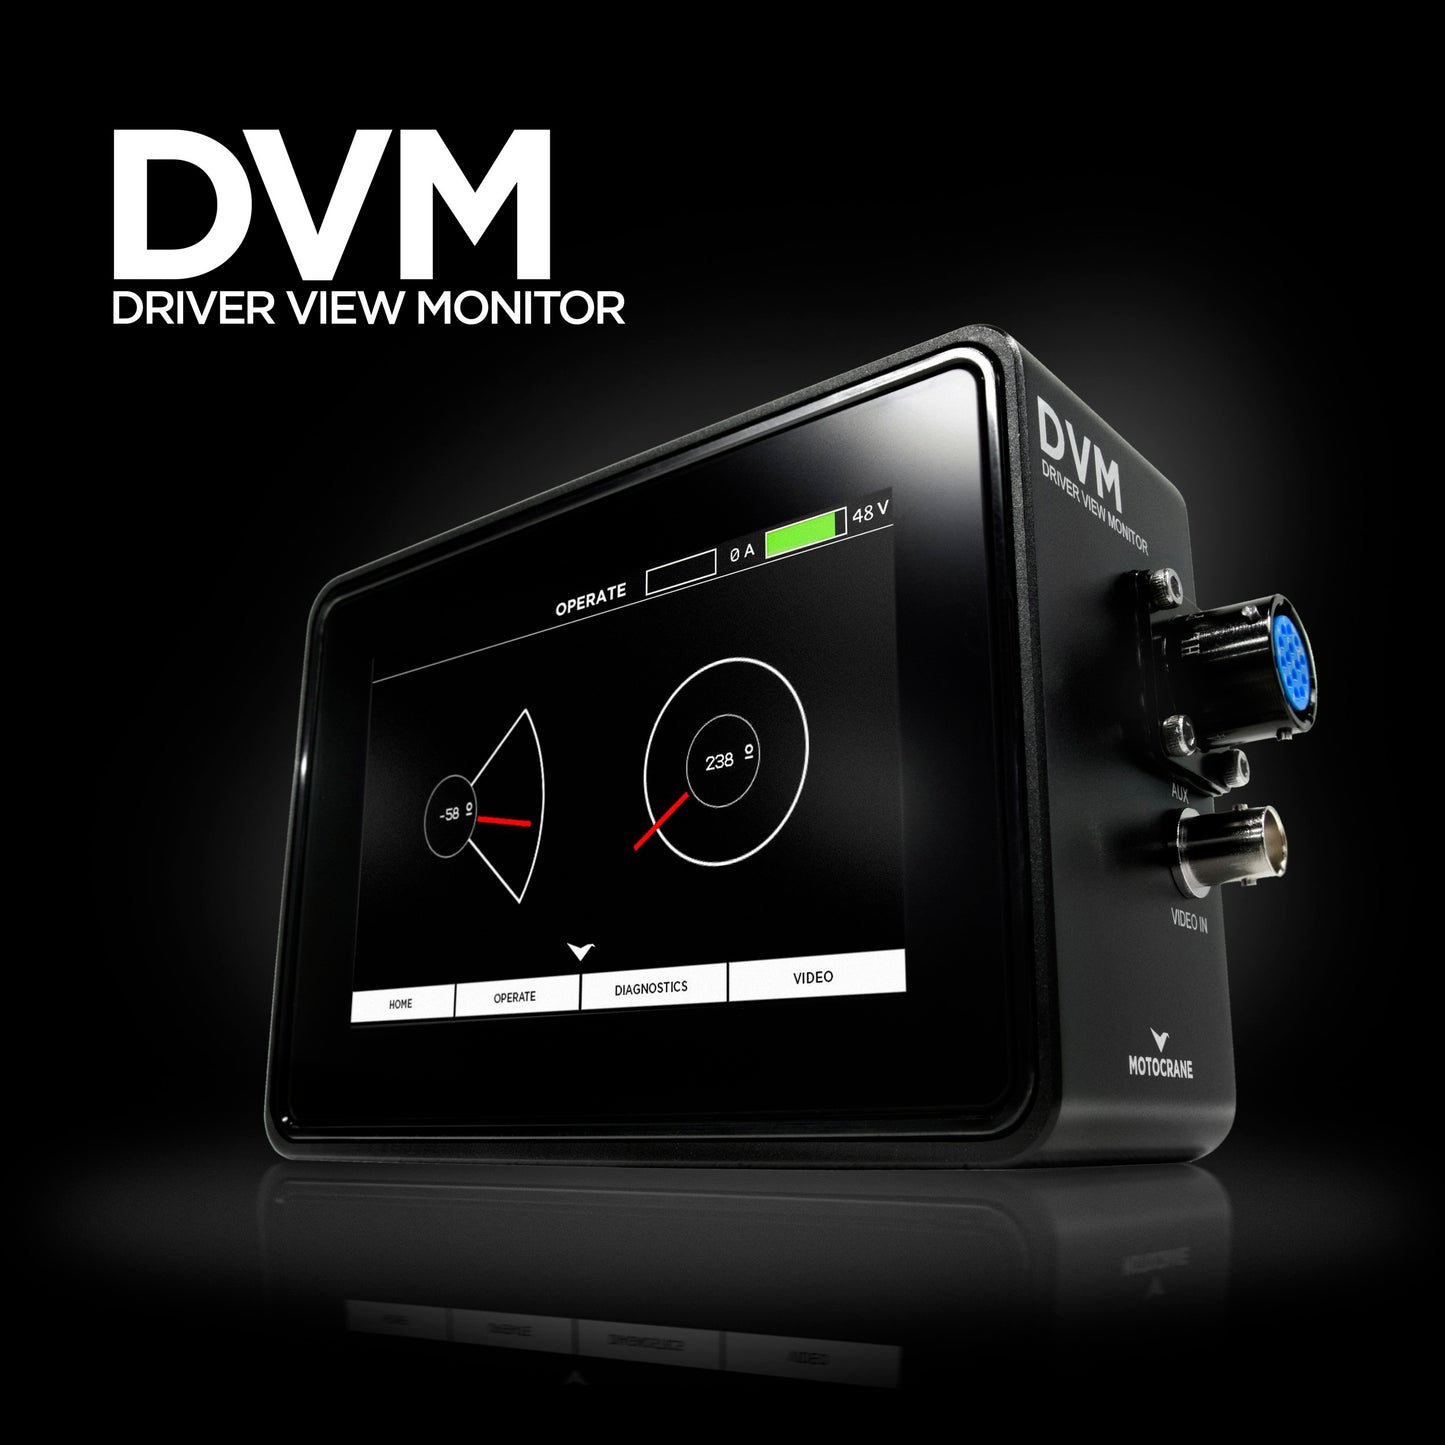 DVM (Driver View Monitor)